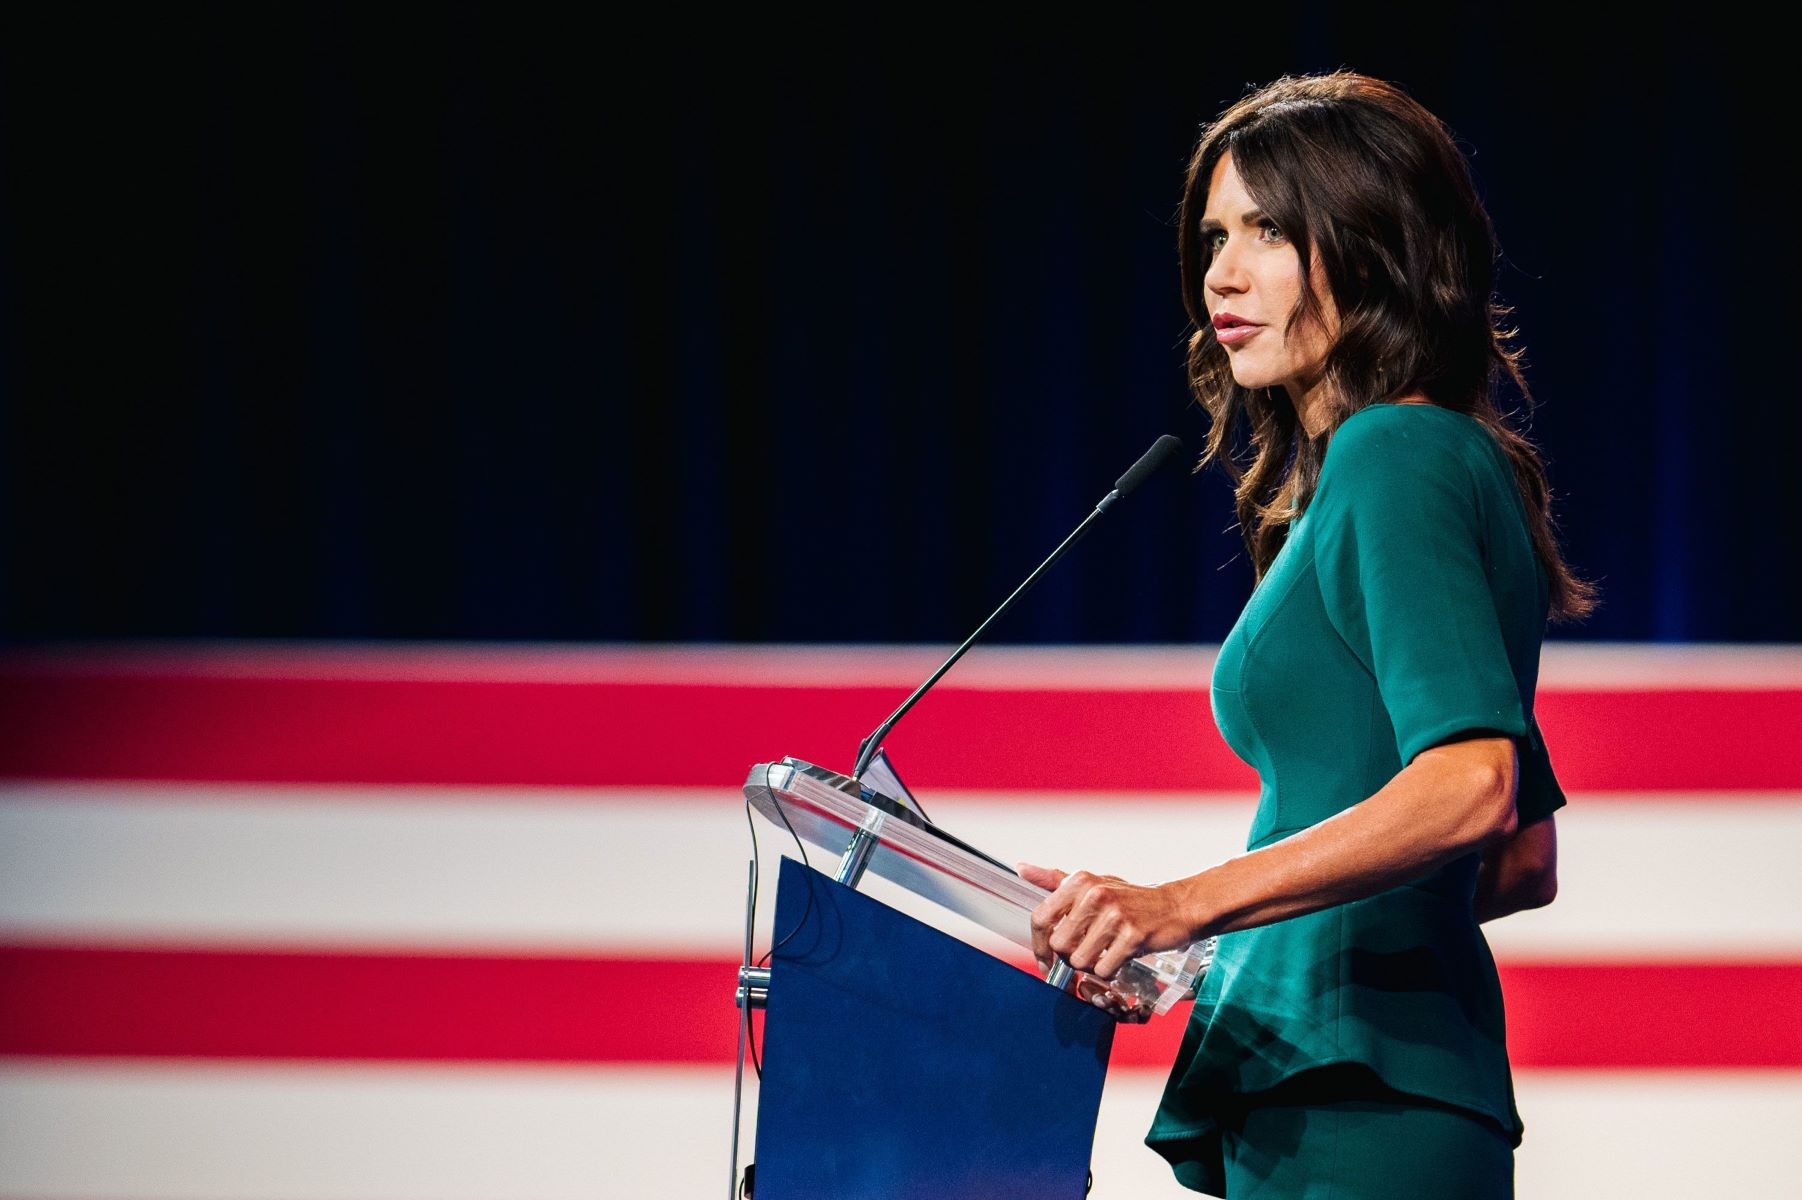 16-facts-about-kristi-noem